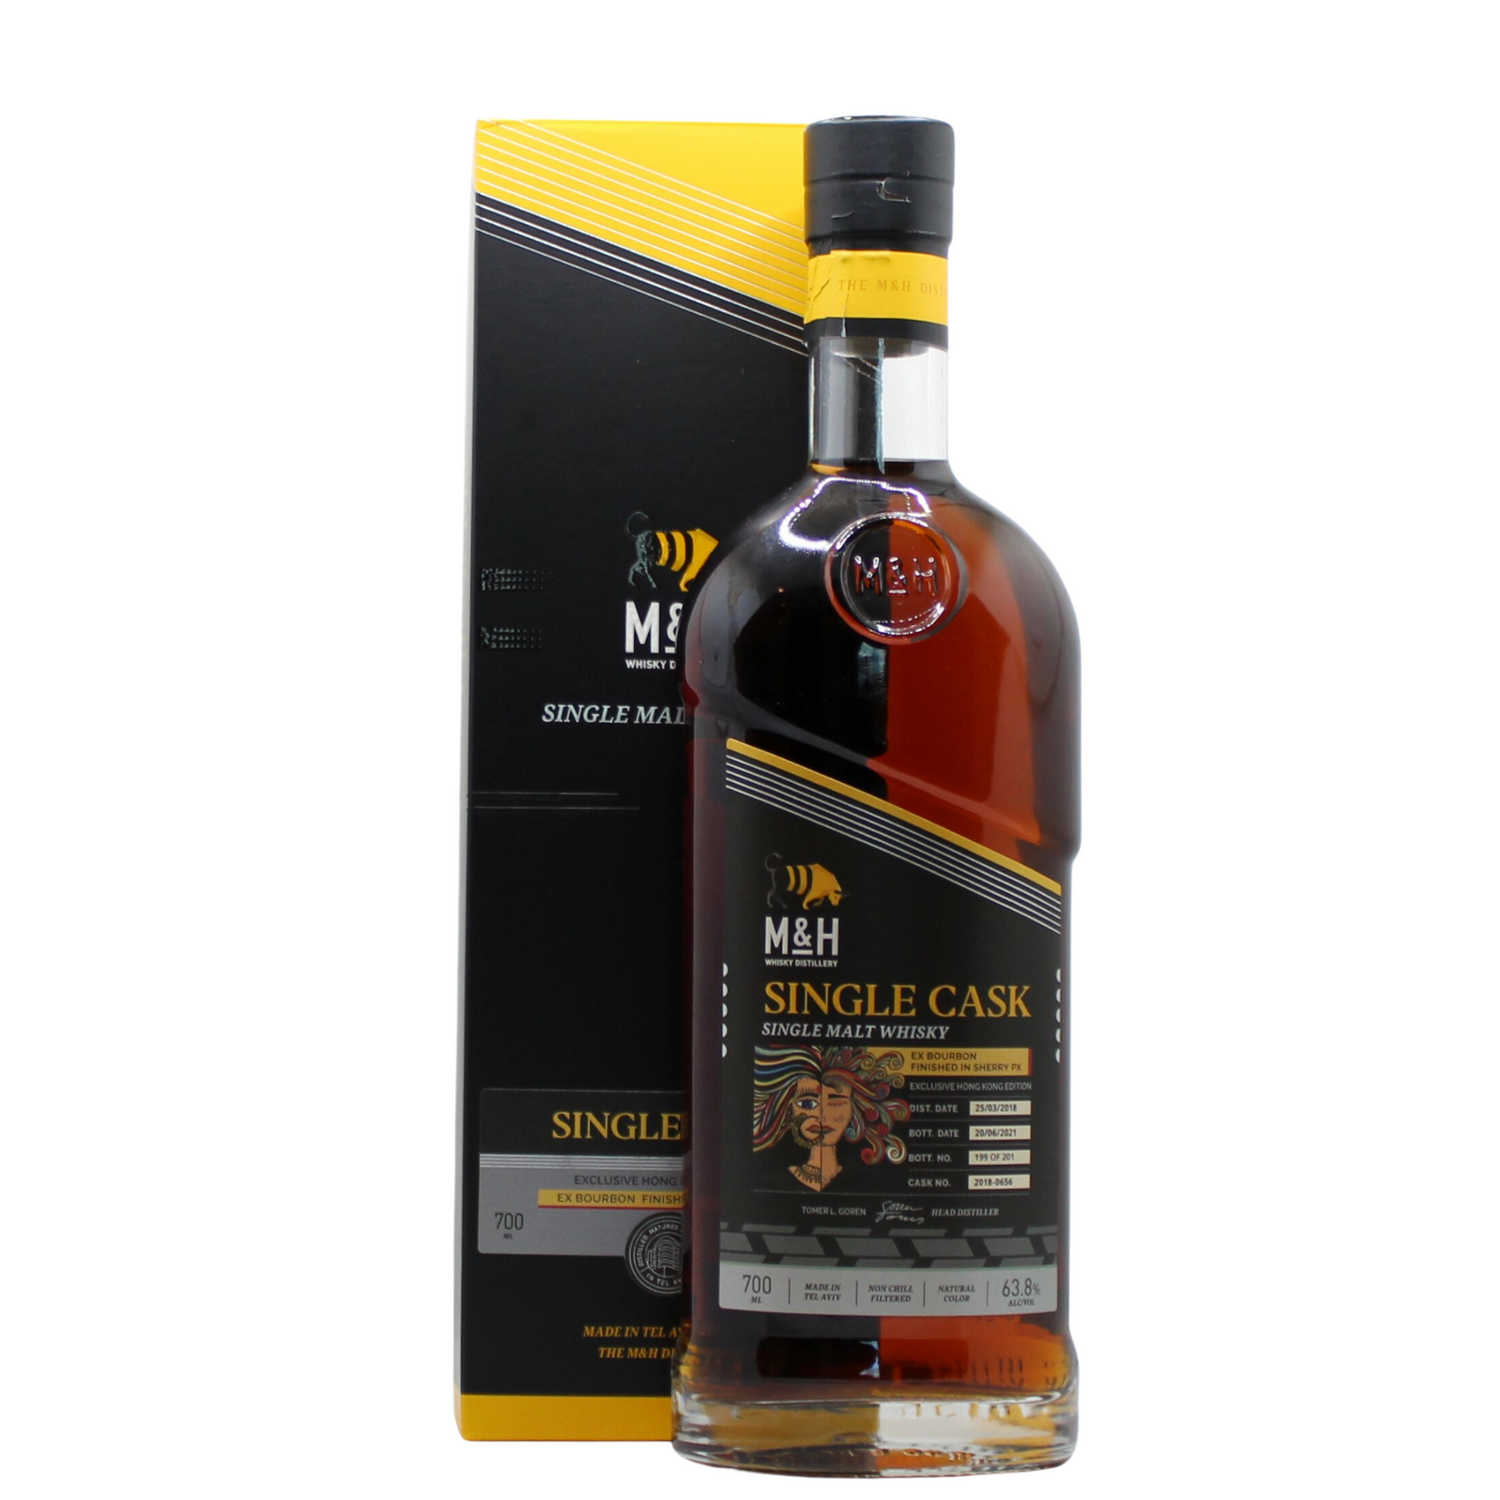 A Single cask selected by Mizunara, HK. In a marriage of casks between a 1st fill ex-bourbon barrel (char level 3) for 2 years and 10 months and a 1st fill ex-PX sherry hogshead (char level 3) for a further 5 months. Distilled from a single Concerto variety of unpeated barley (grown/malted in England), the cask was filled on 25/03/2018 at 64.5% ABV and matured in a natural environment at M&H’s Jaffa warehouse. 